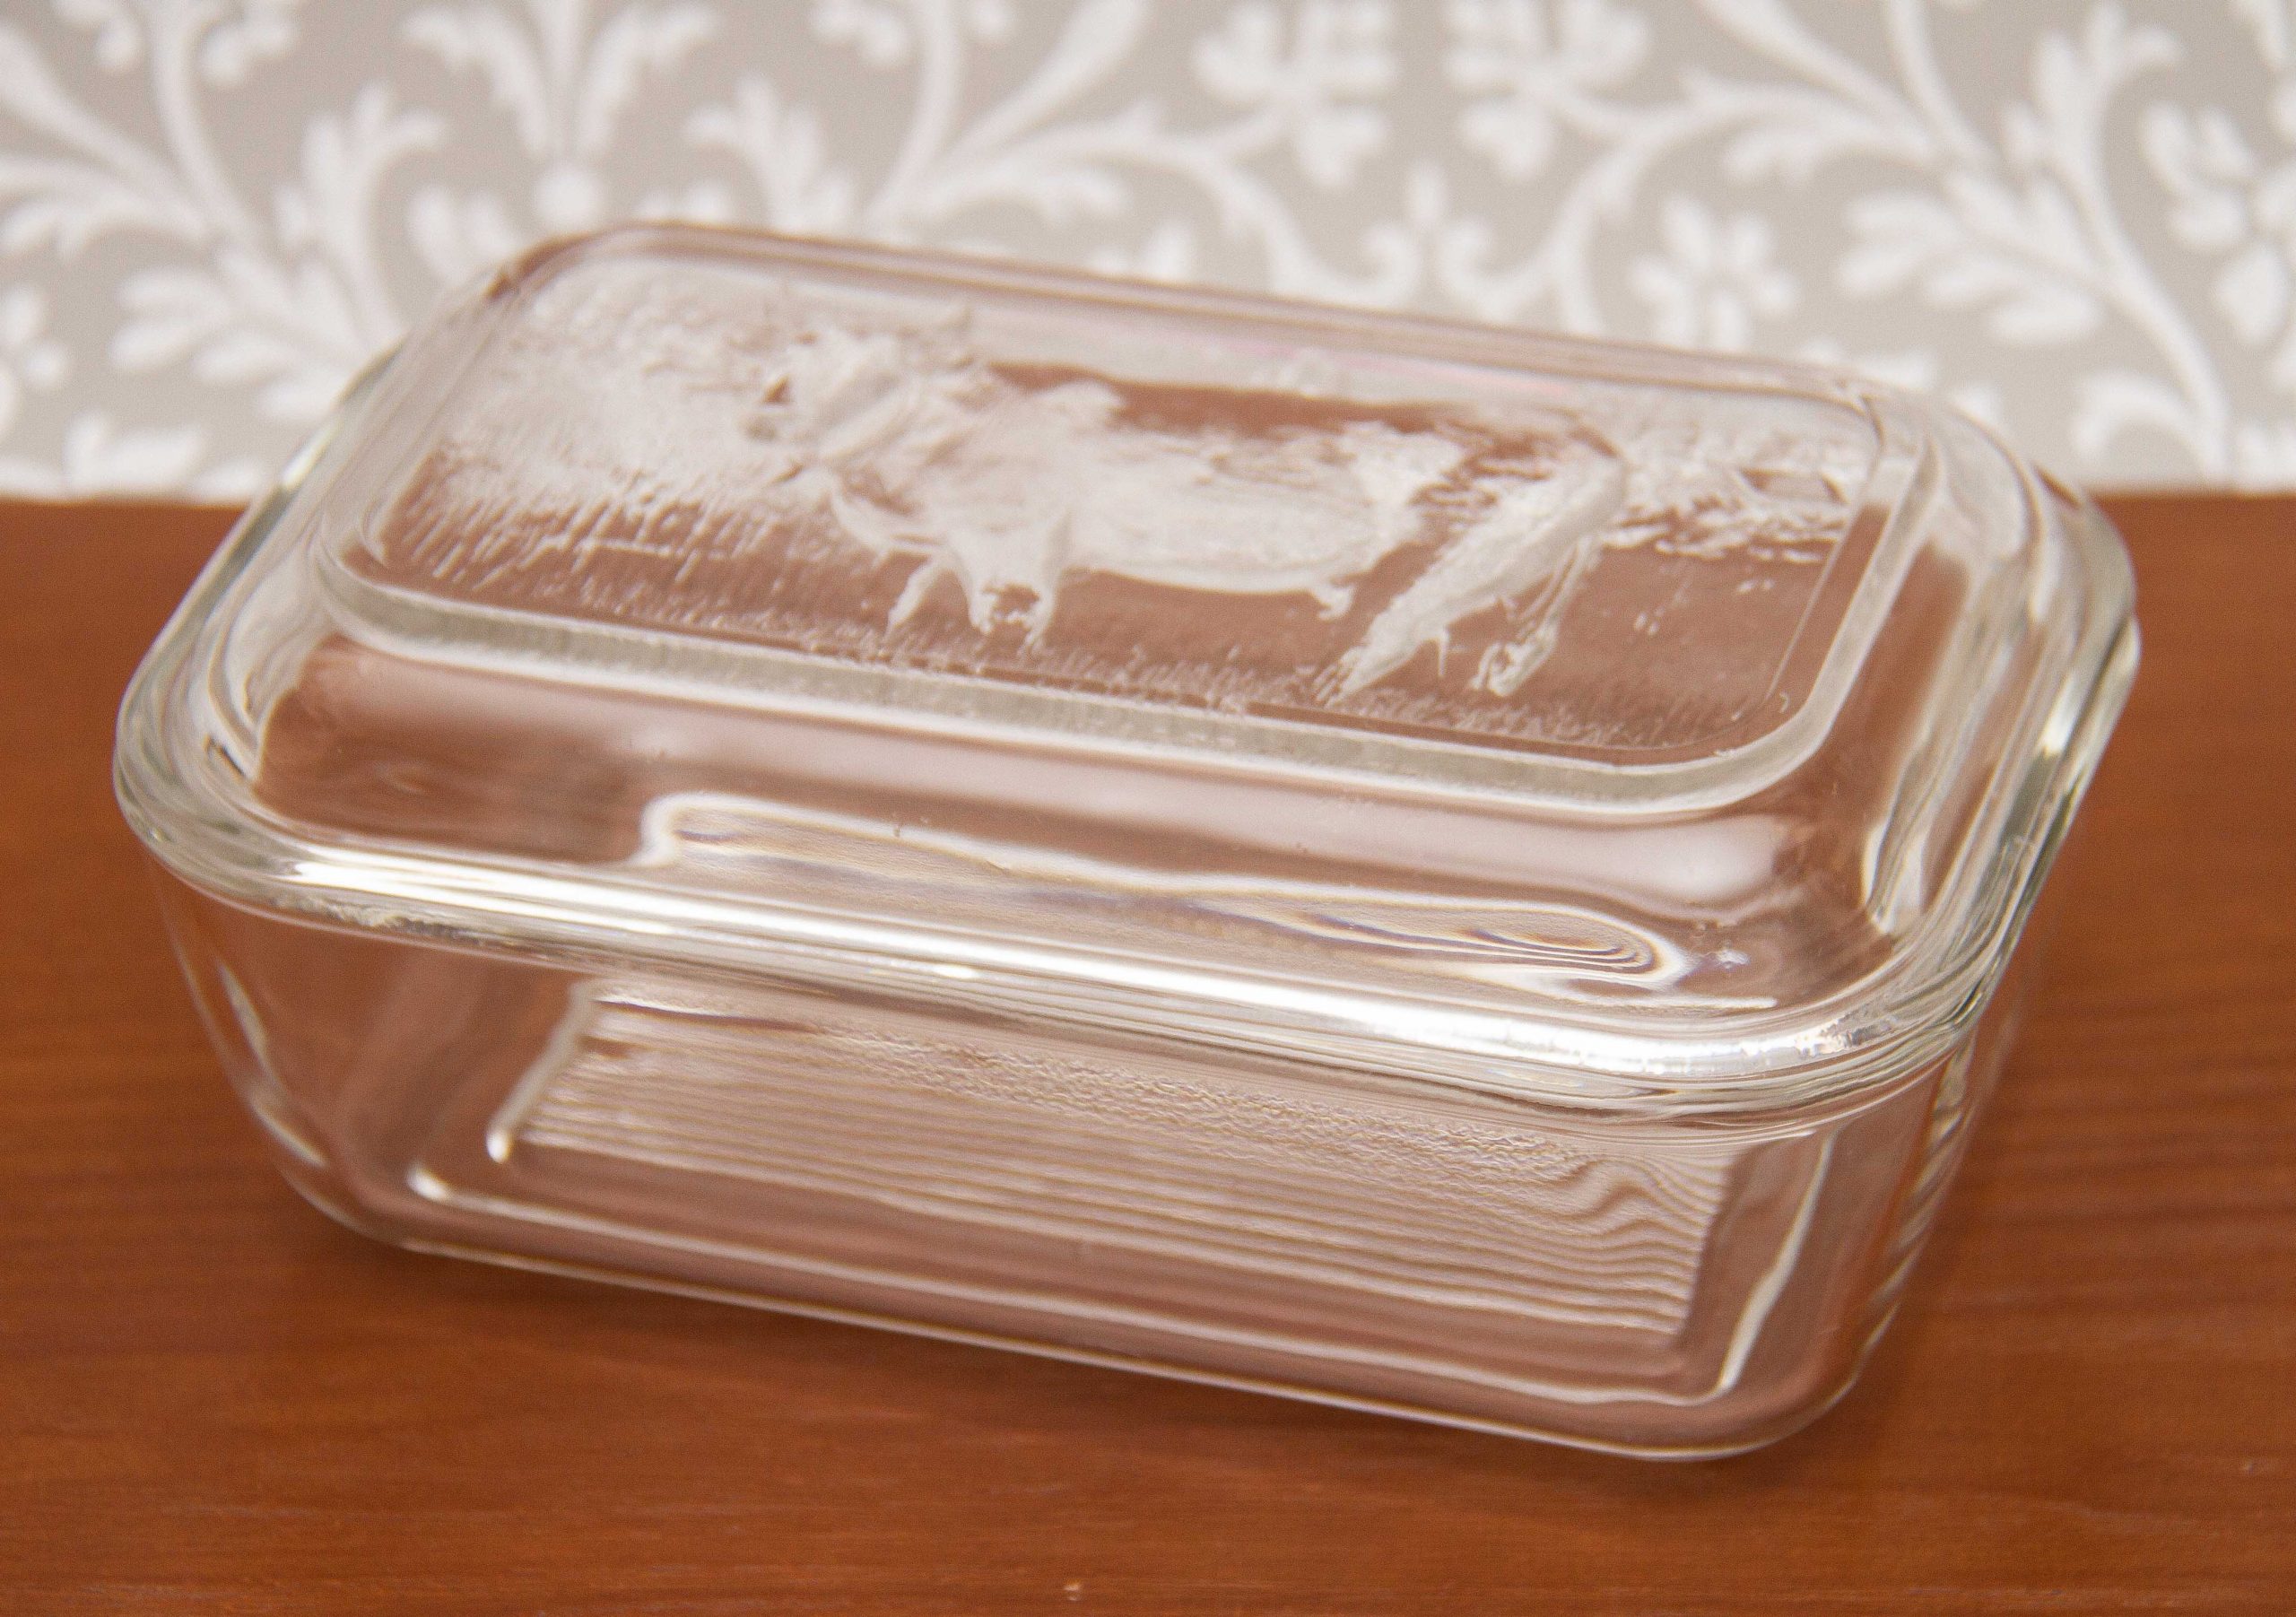 Cow Kitchen Decor French Arcoroc Pressed Glass Butter Dish Cow Table Decor Vintage French Glass Cow Butter Dish Breakfast Butter Dish